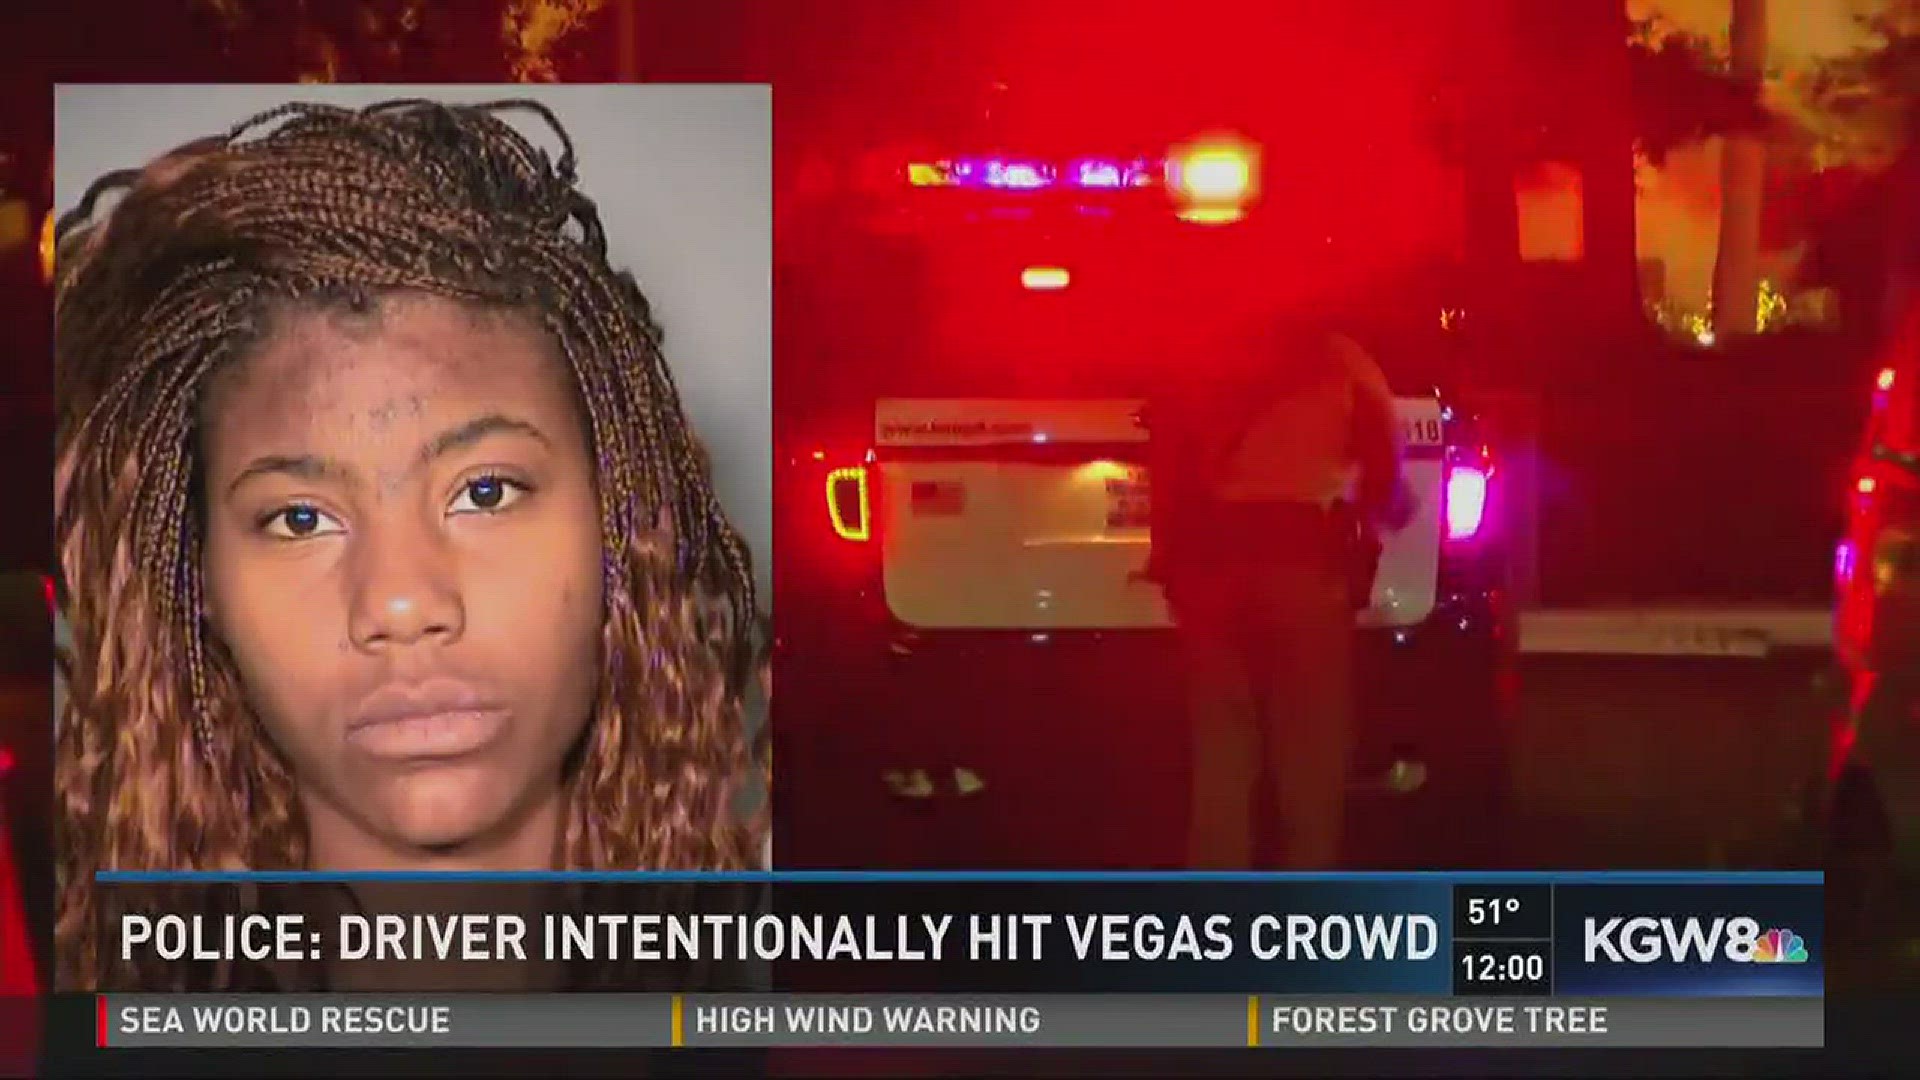 Police: Driver intentionally hit Vegas crowd